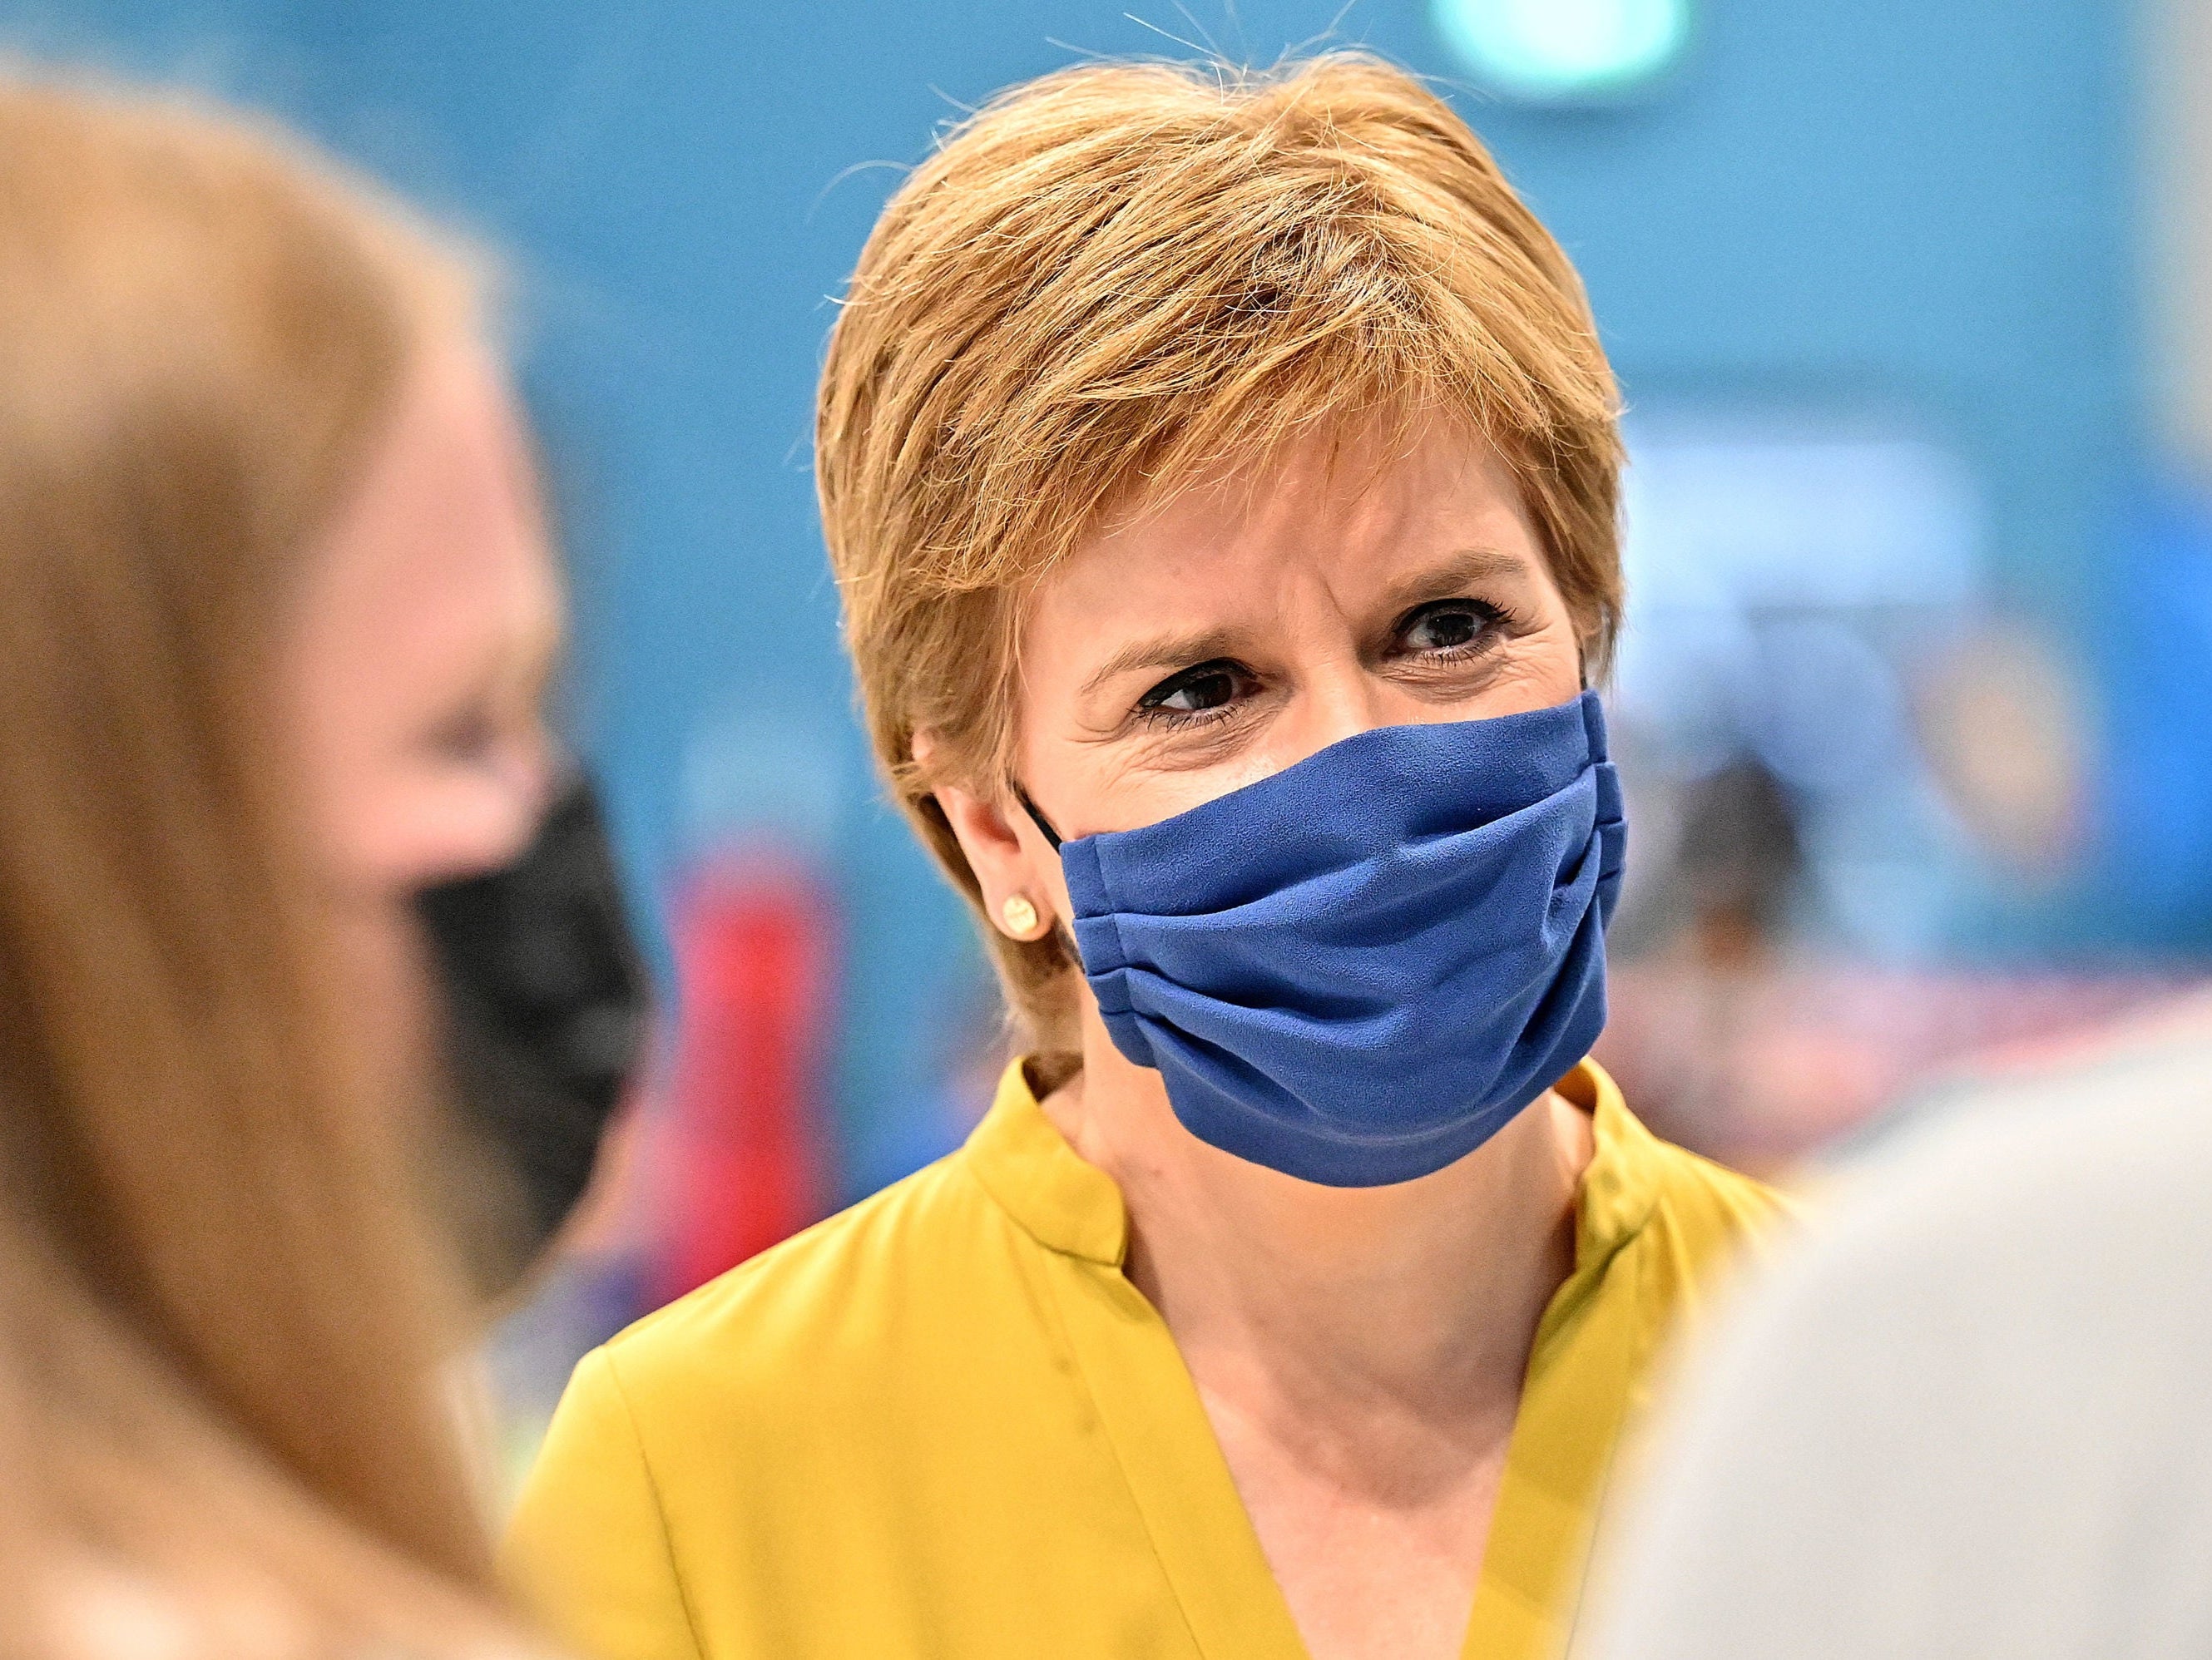 Police Scotland has confirmed that the sister of SNP leader Nicola Sturgeon has been charged over an alleged incident in North Ayrshire